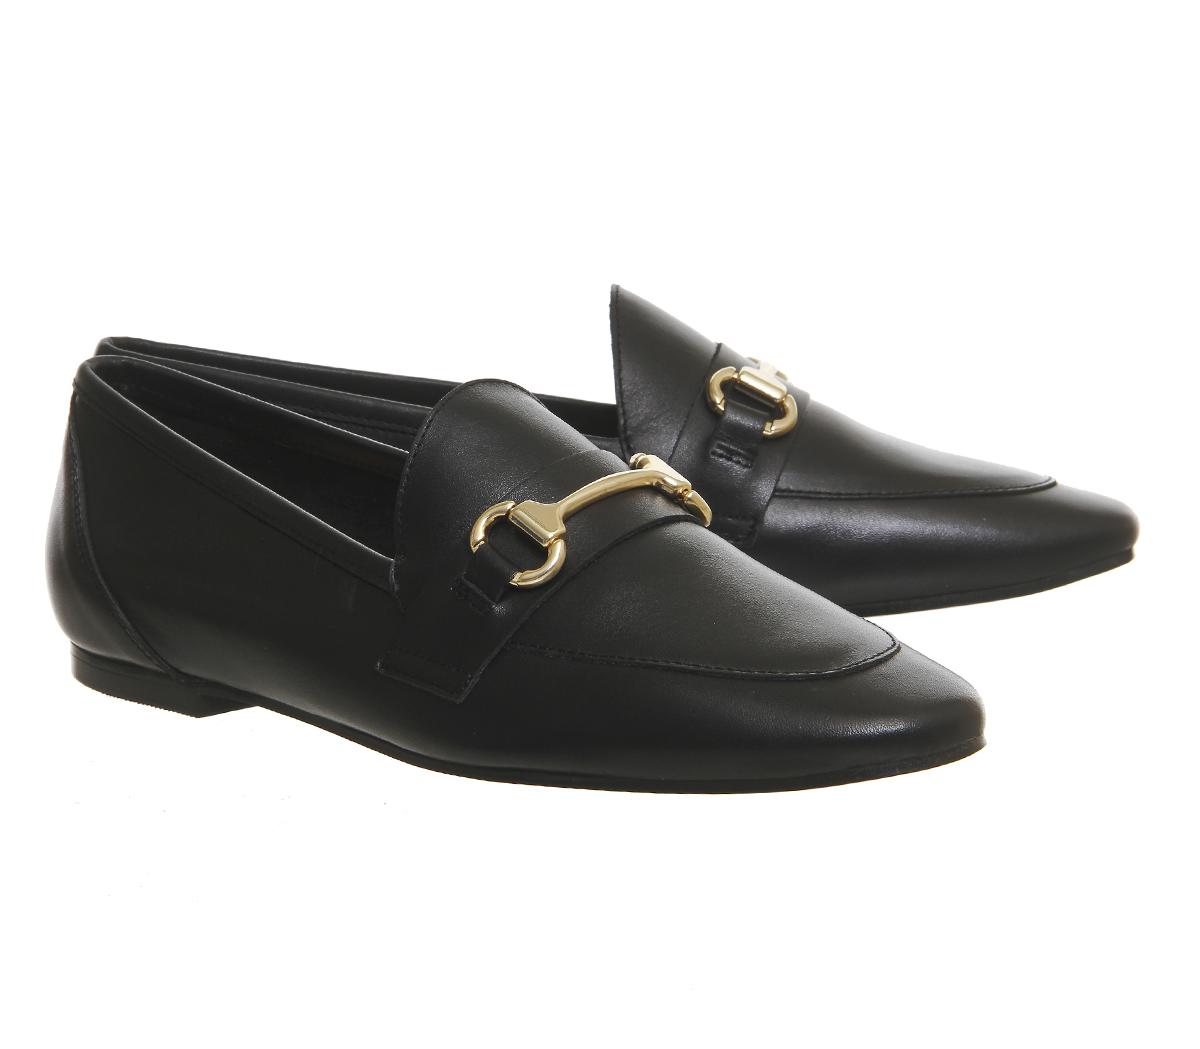 OFFICE Destiny Trim Loafers Black Leather - Flat Shoes for Women